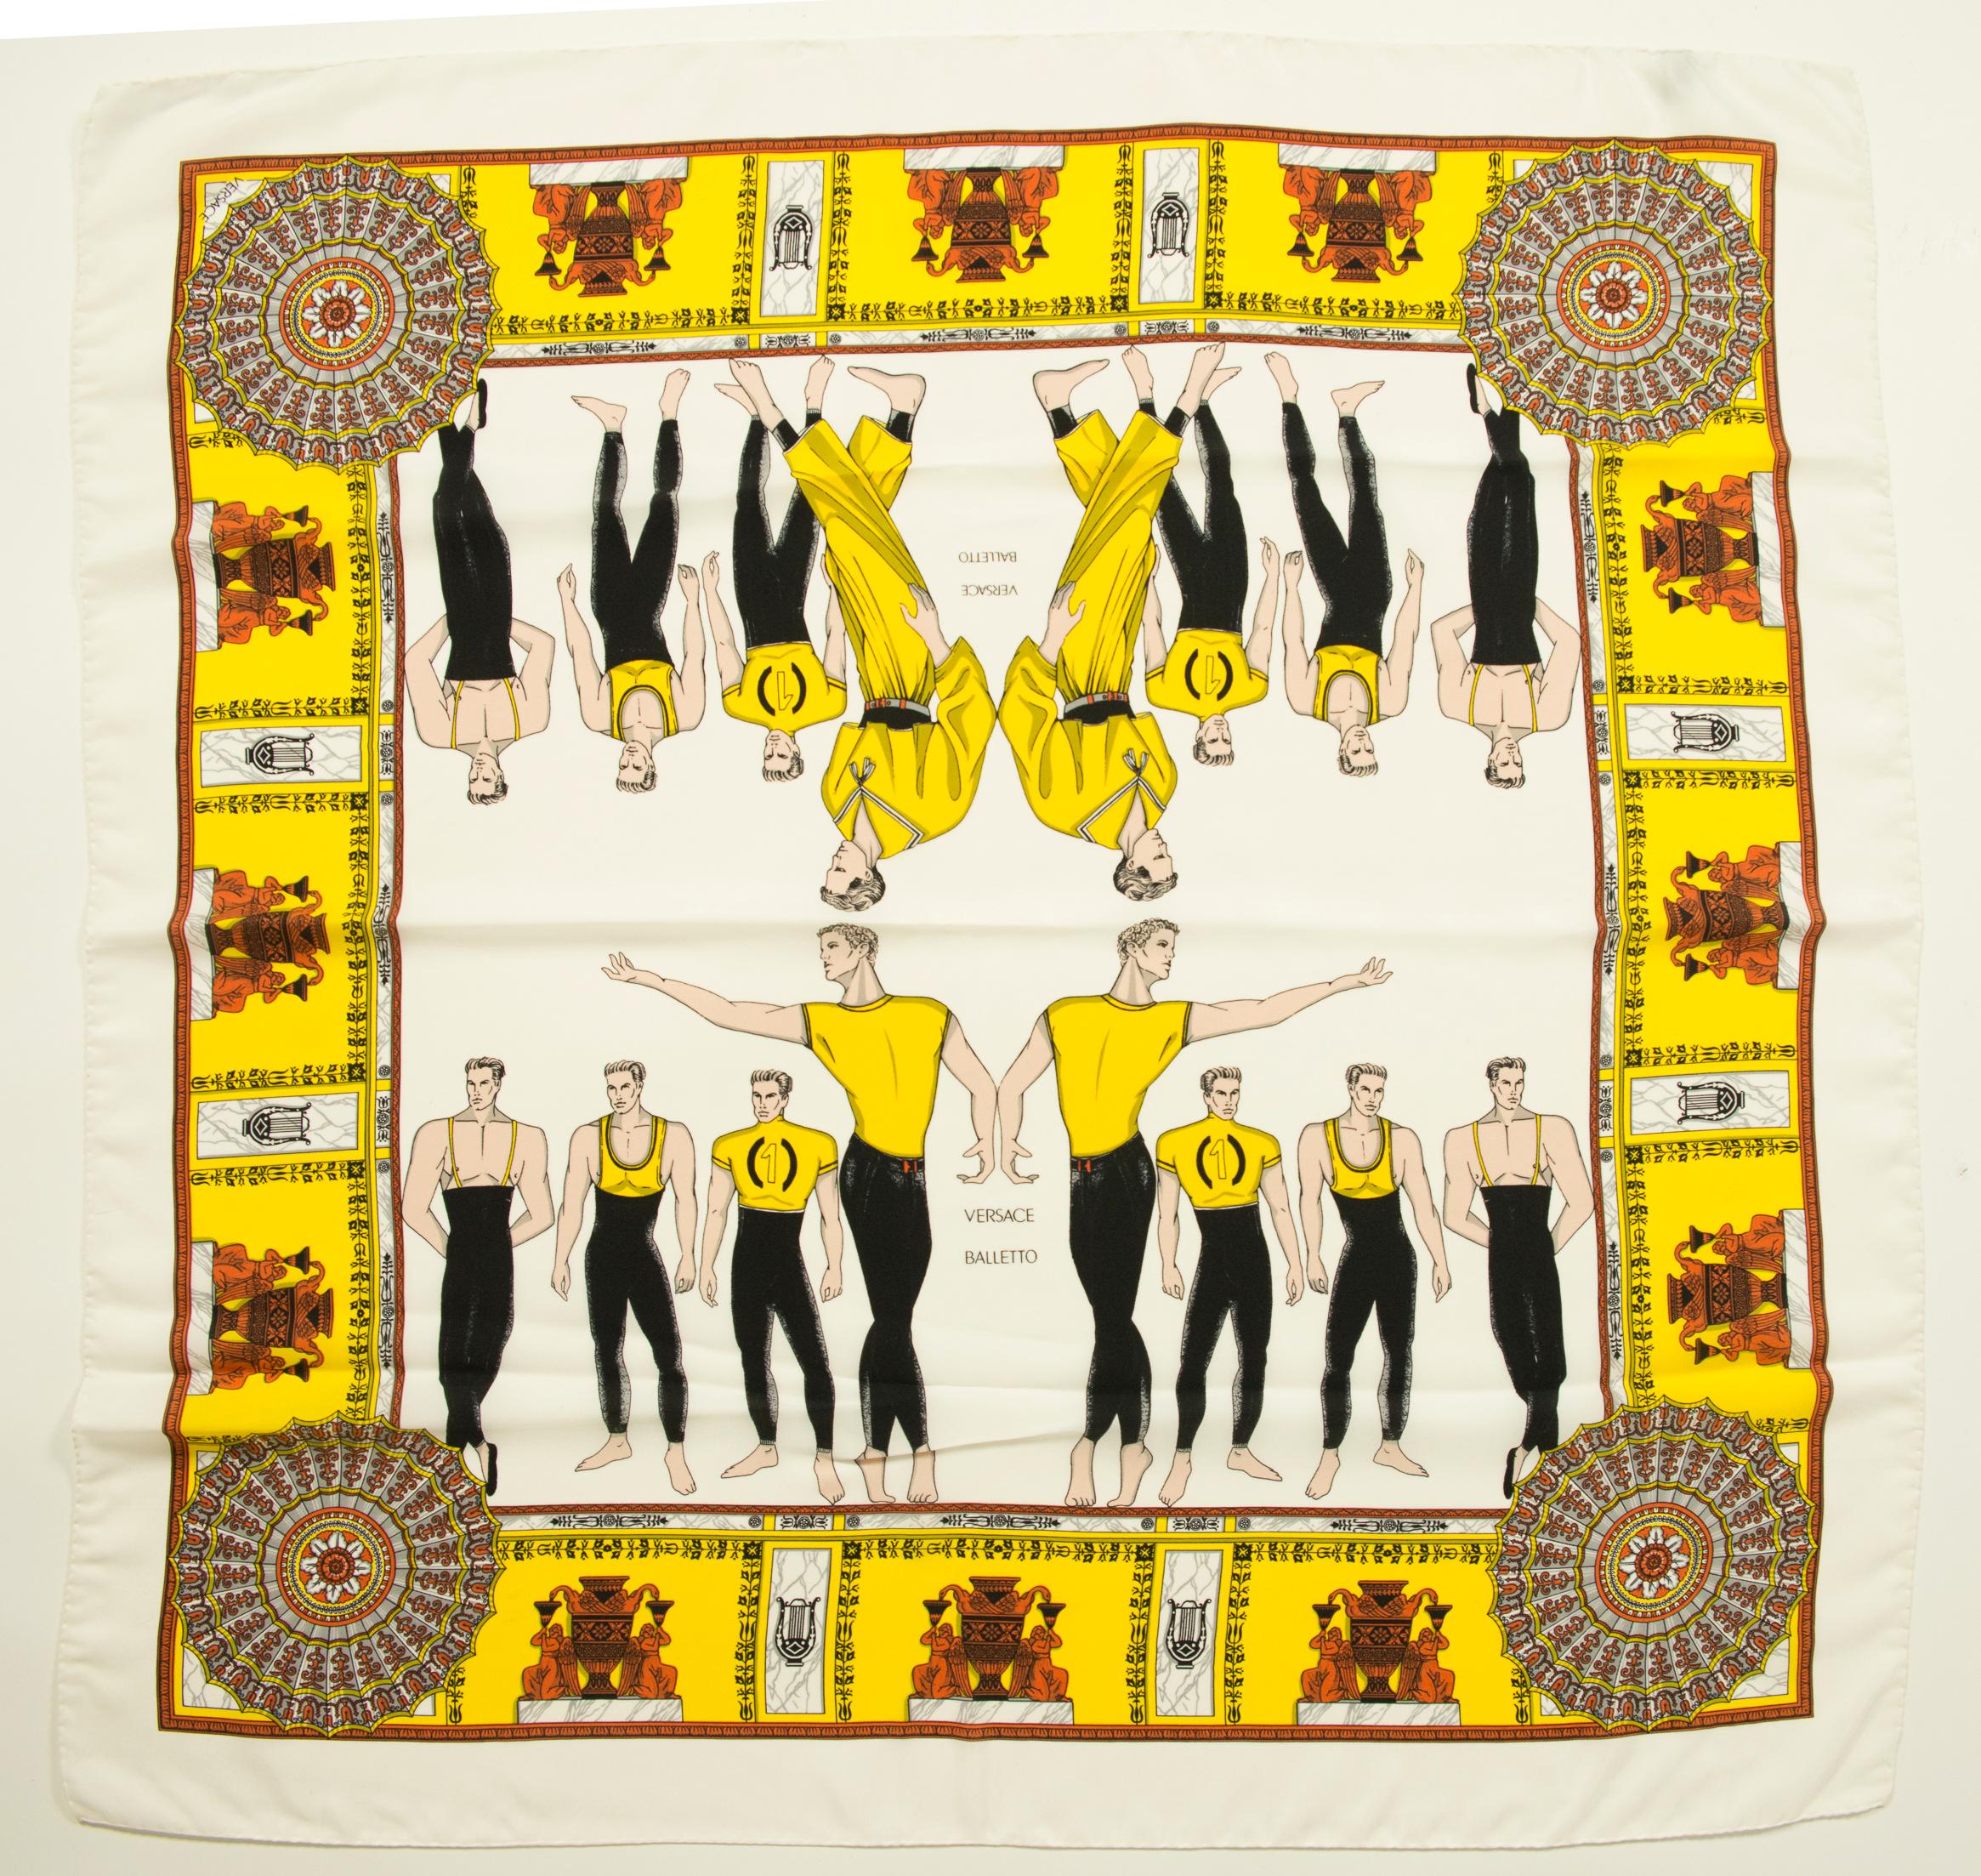 As a true dance enthusiast, it is not surprising to find references to this Art in Gianni's work. From 1984 until his tragic death, Gianni Versace collaborated with the famous French choreographer Maurice Béjart by designing him costumes for a dozen